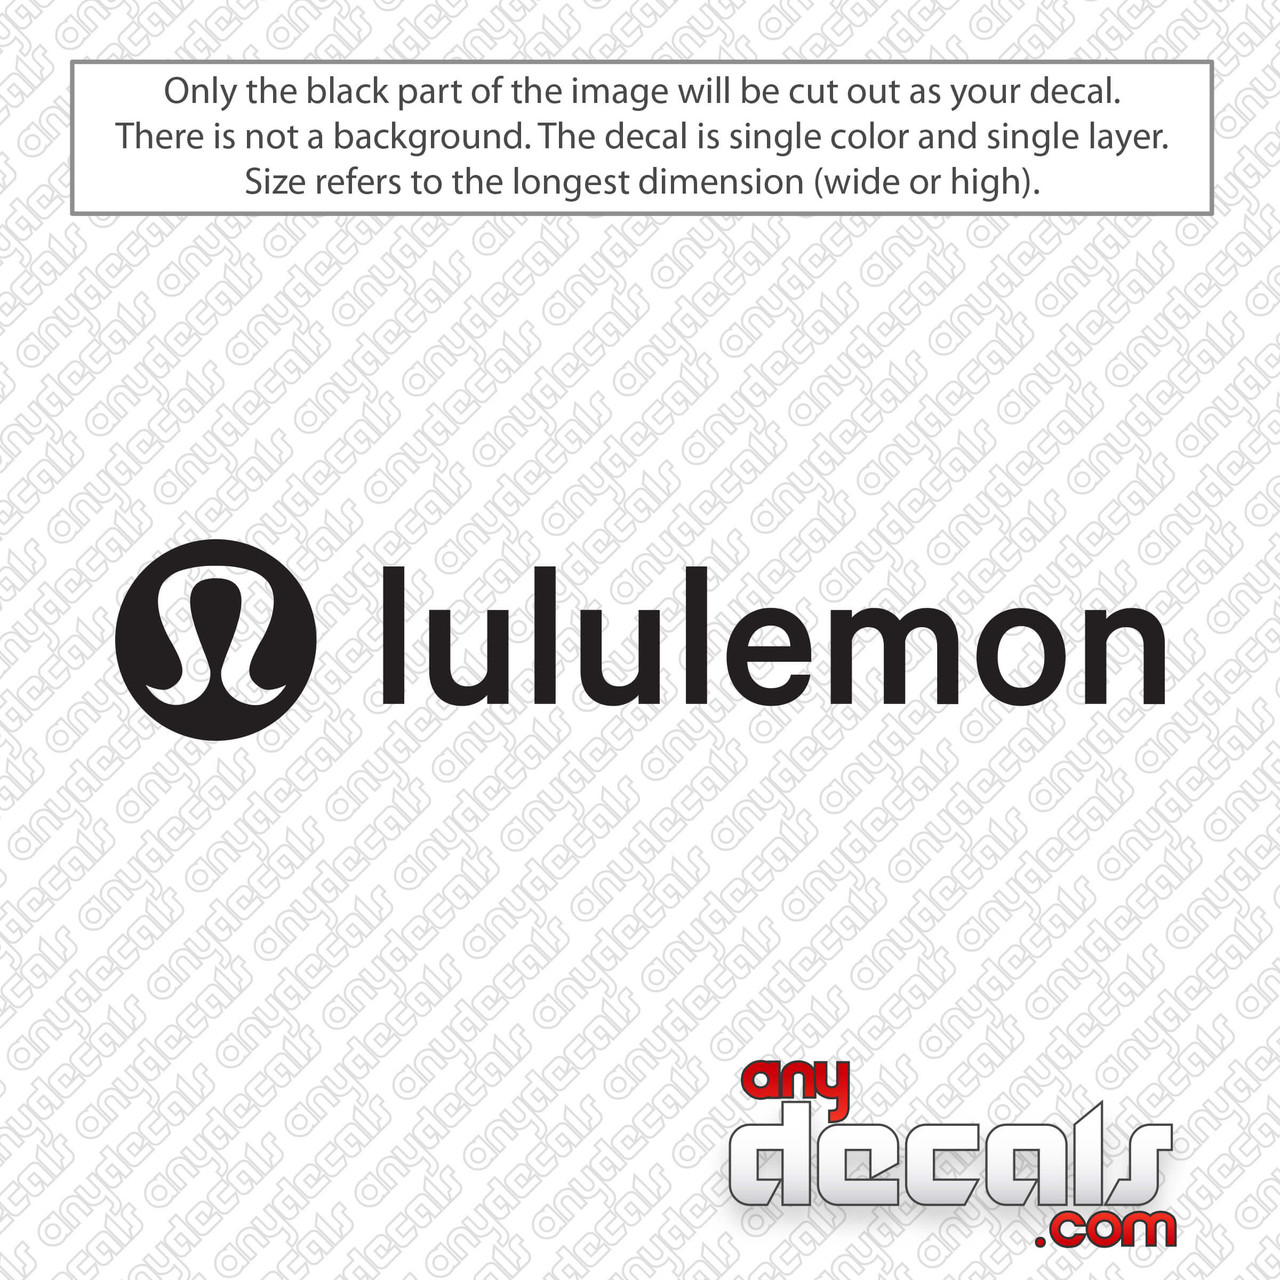 LULULEMON LOGO CUSTOM DECAL/STICKER.. PICK SIZE AND COLOR FREE SHIPPING